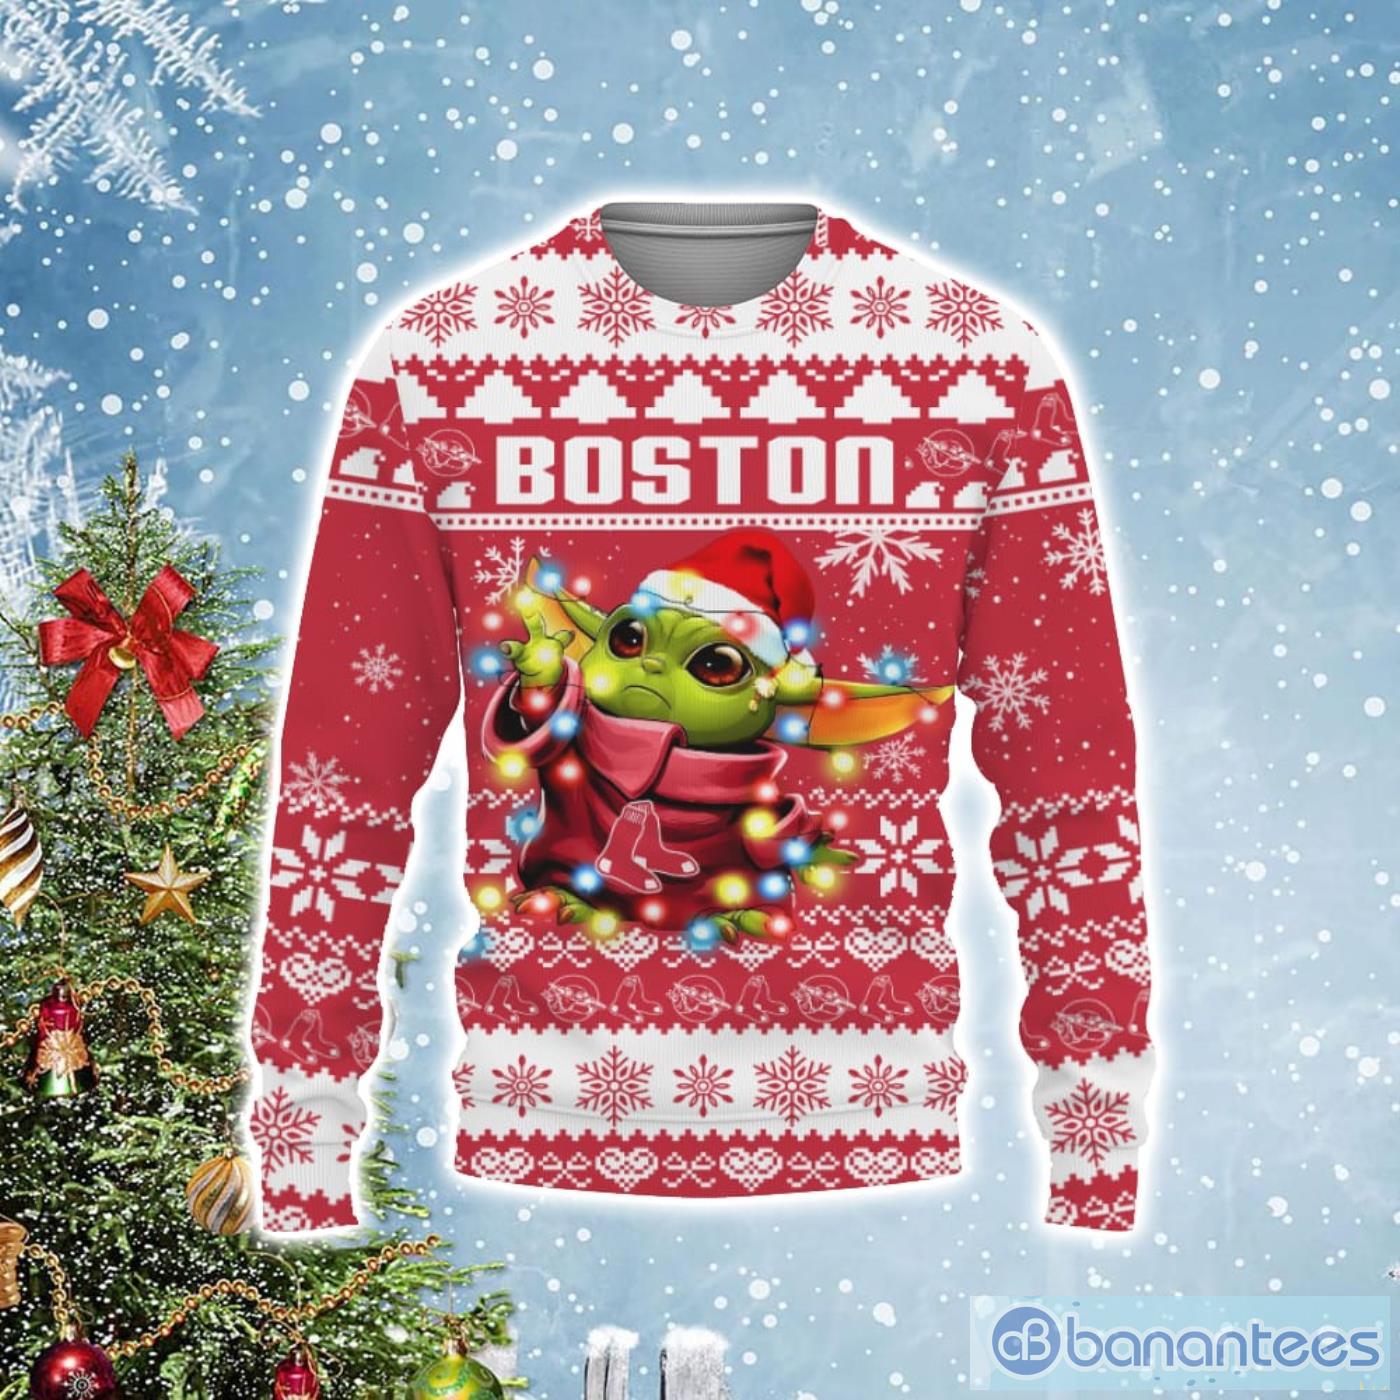 Boston Red Sox Baby Yoda Star Wars Ugly Christmas Sweater Product Photo 1